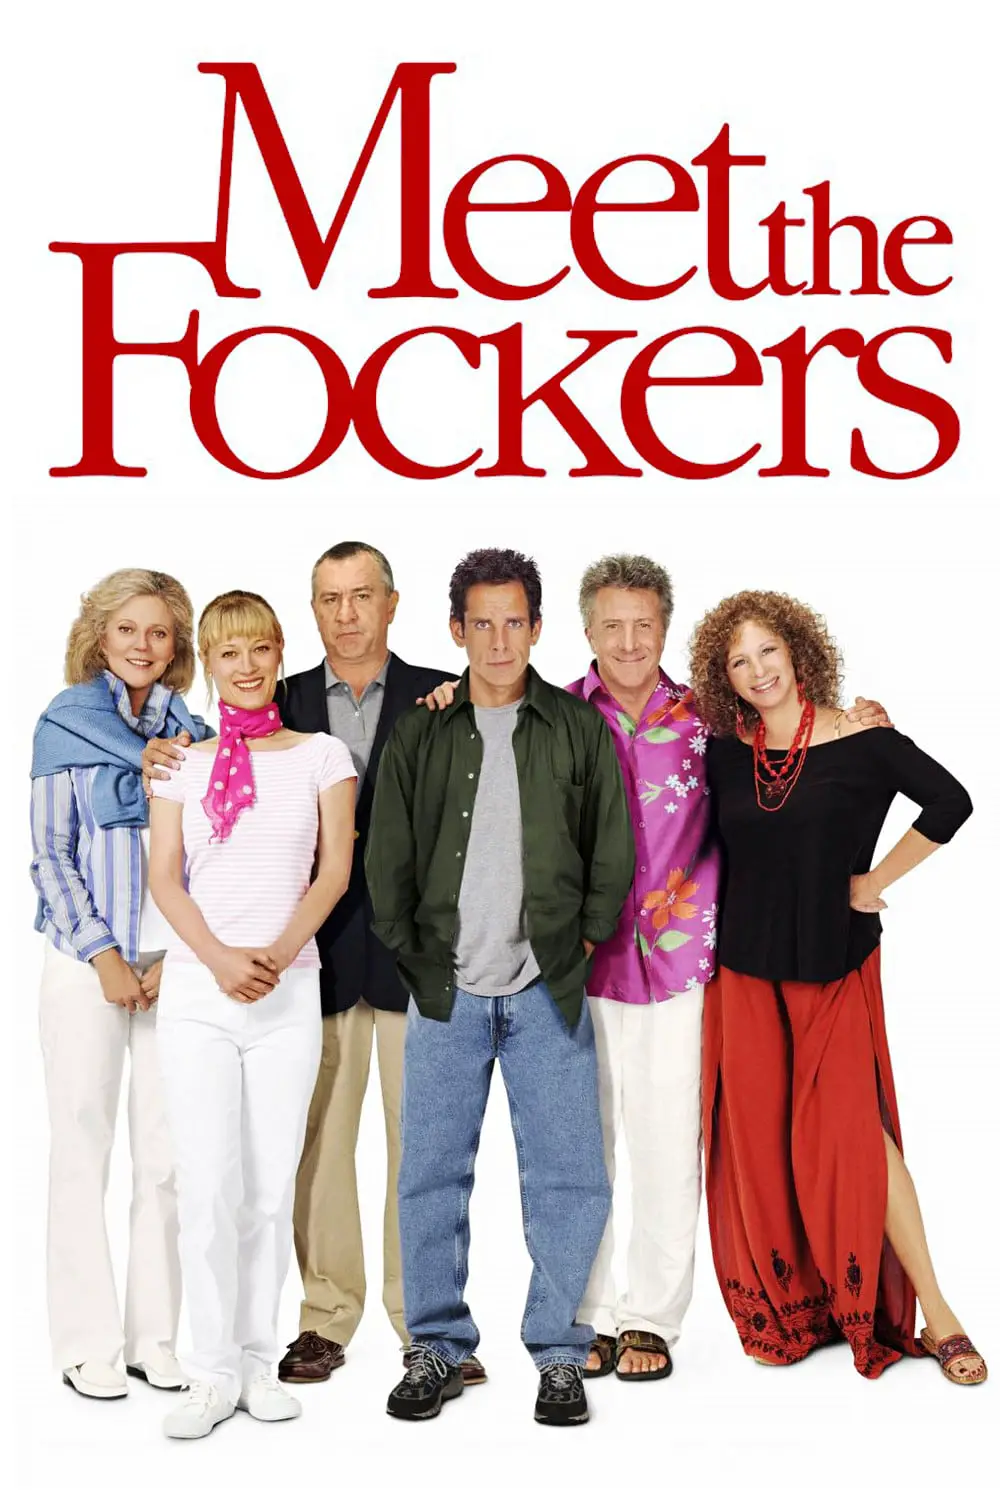 You are currently viewing Meet the Fockers